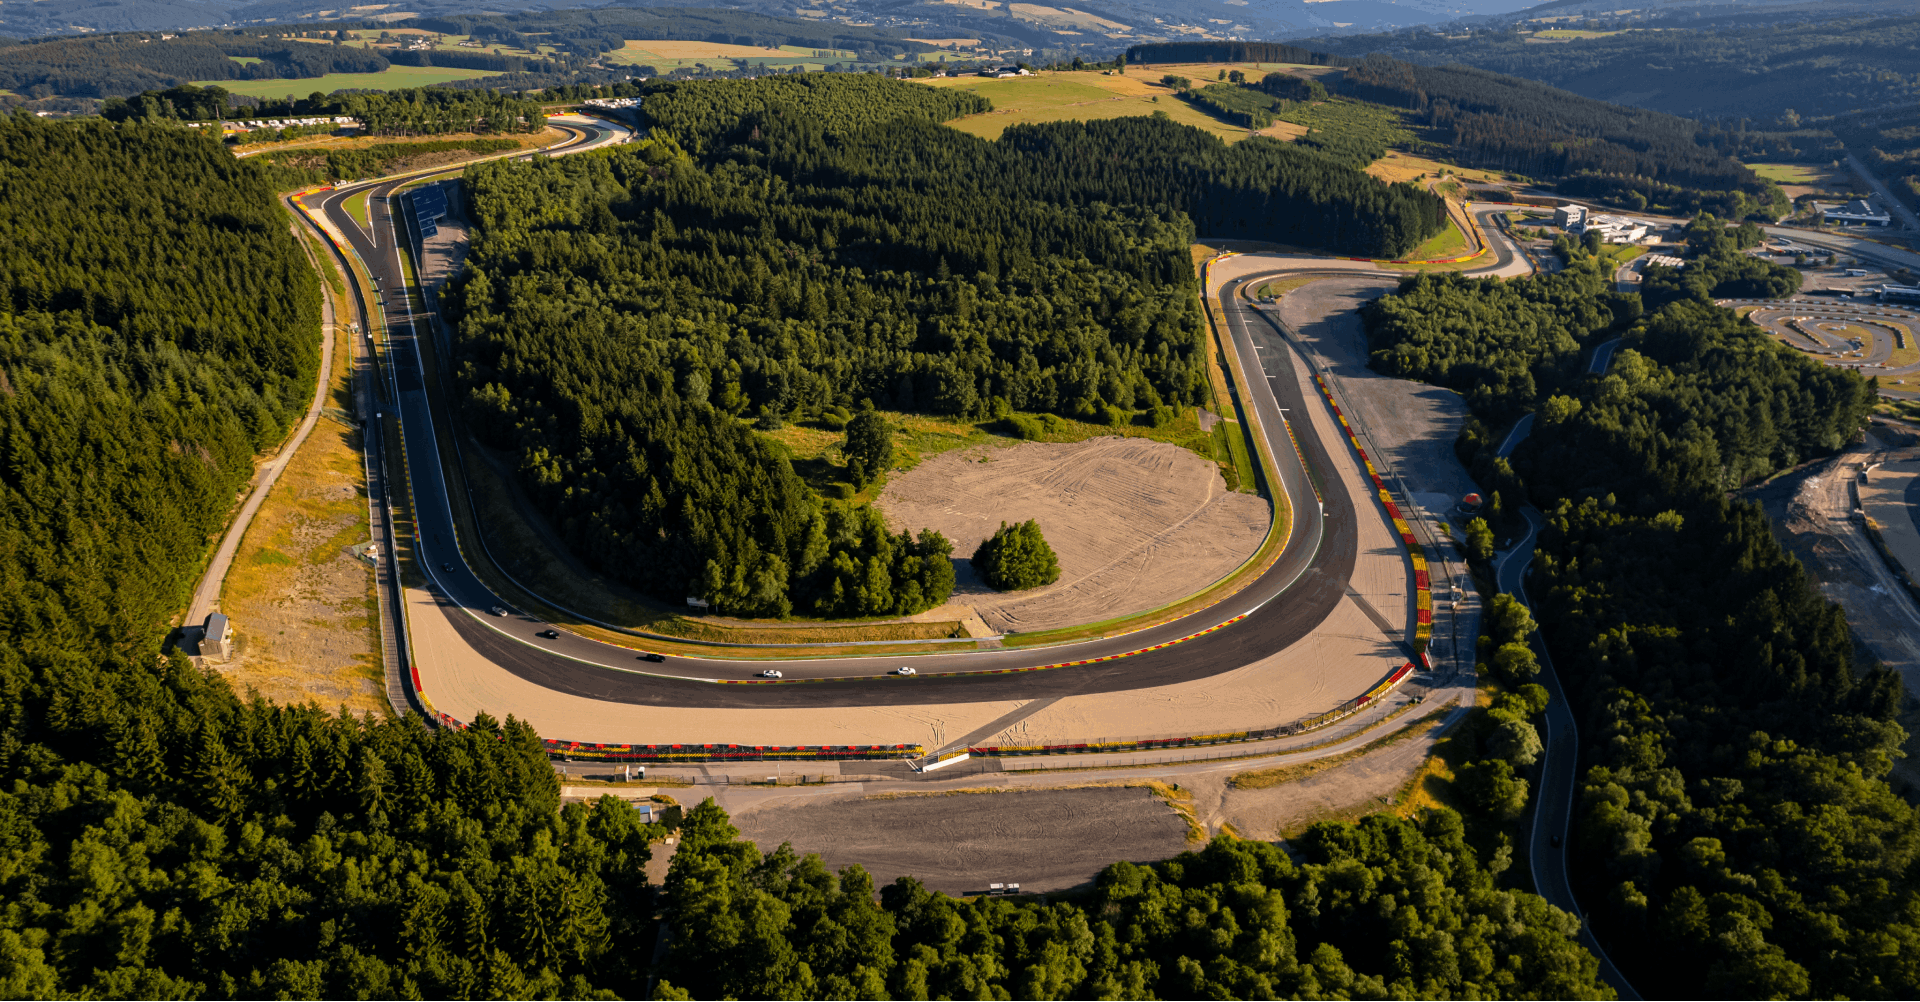 Image SpaFrancorchamps